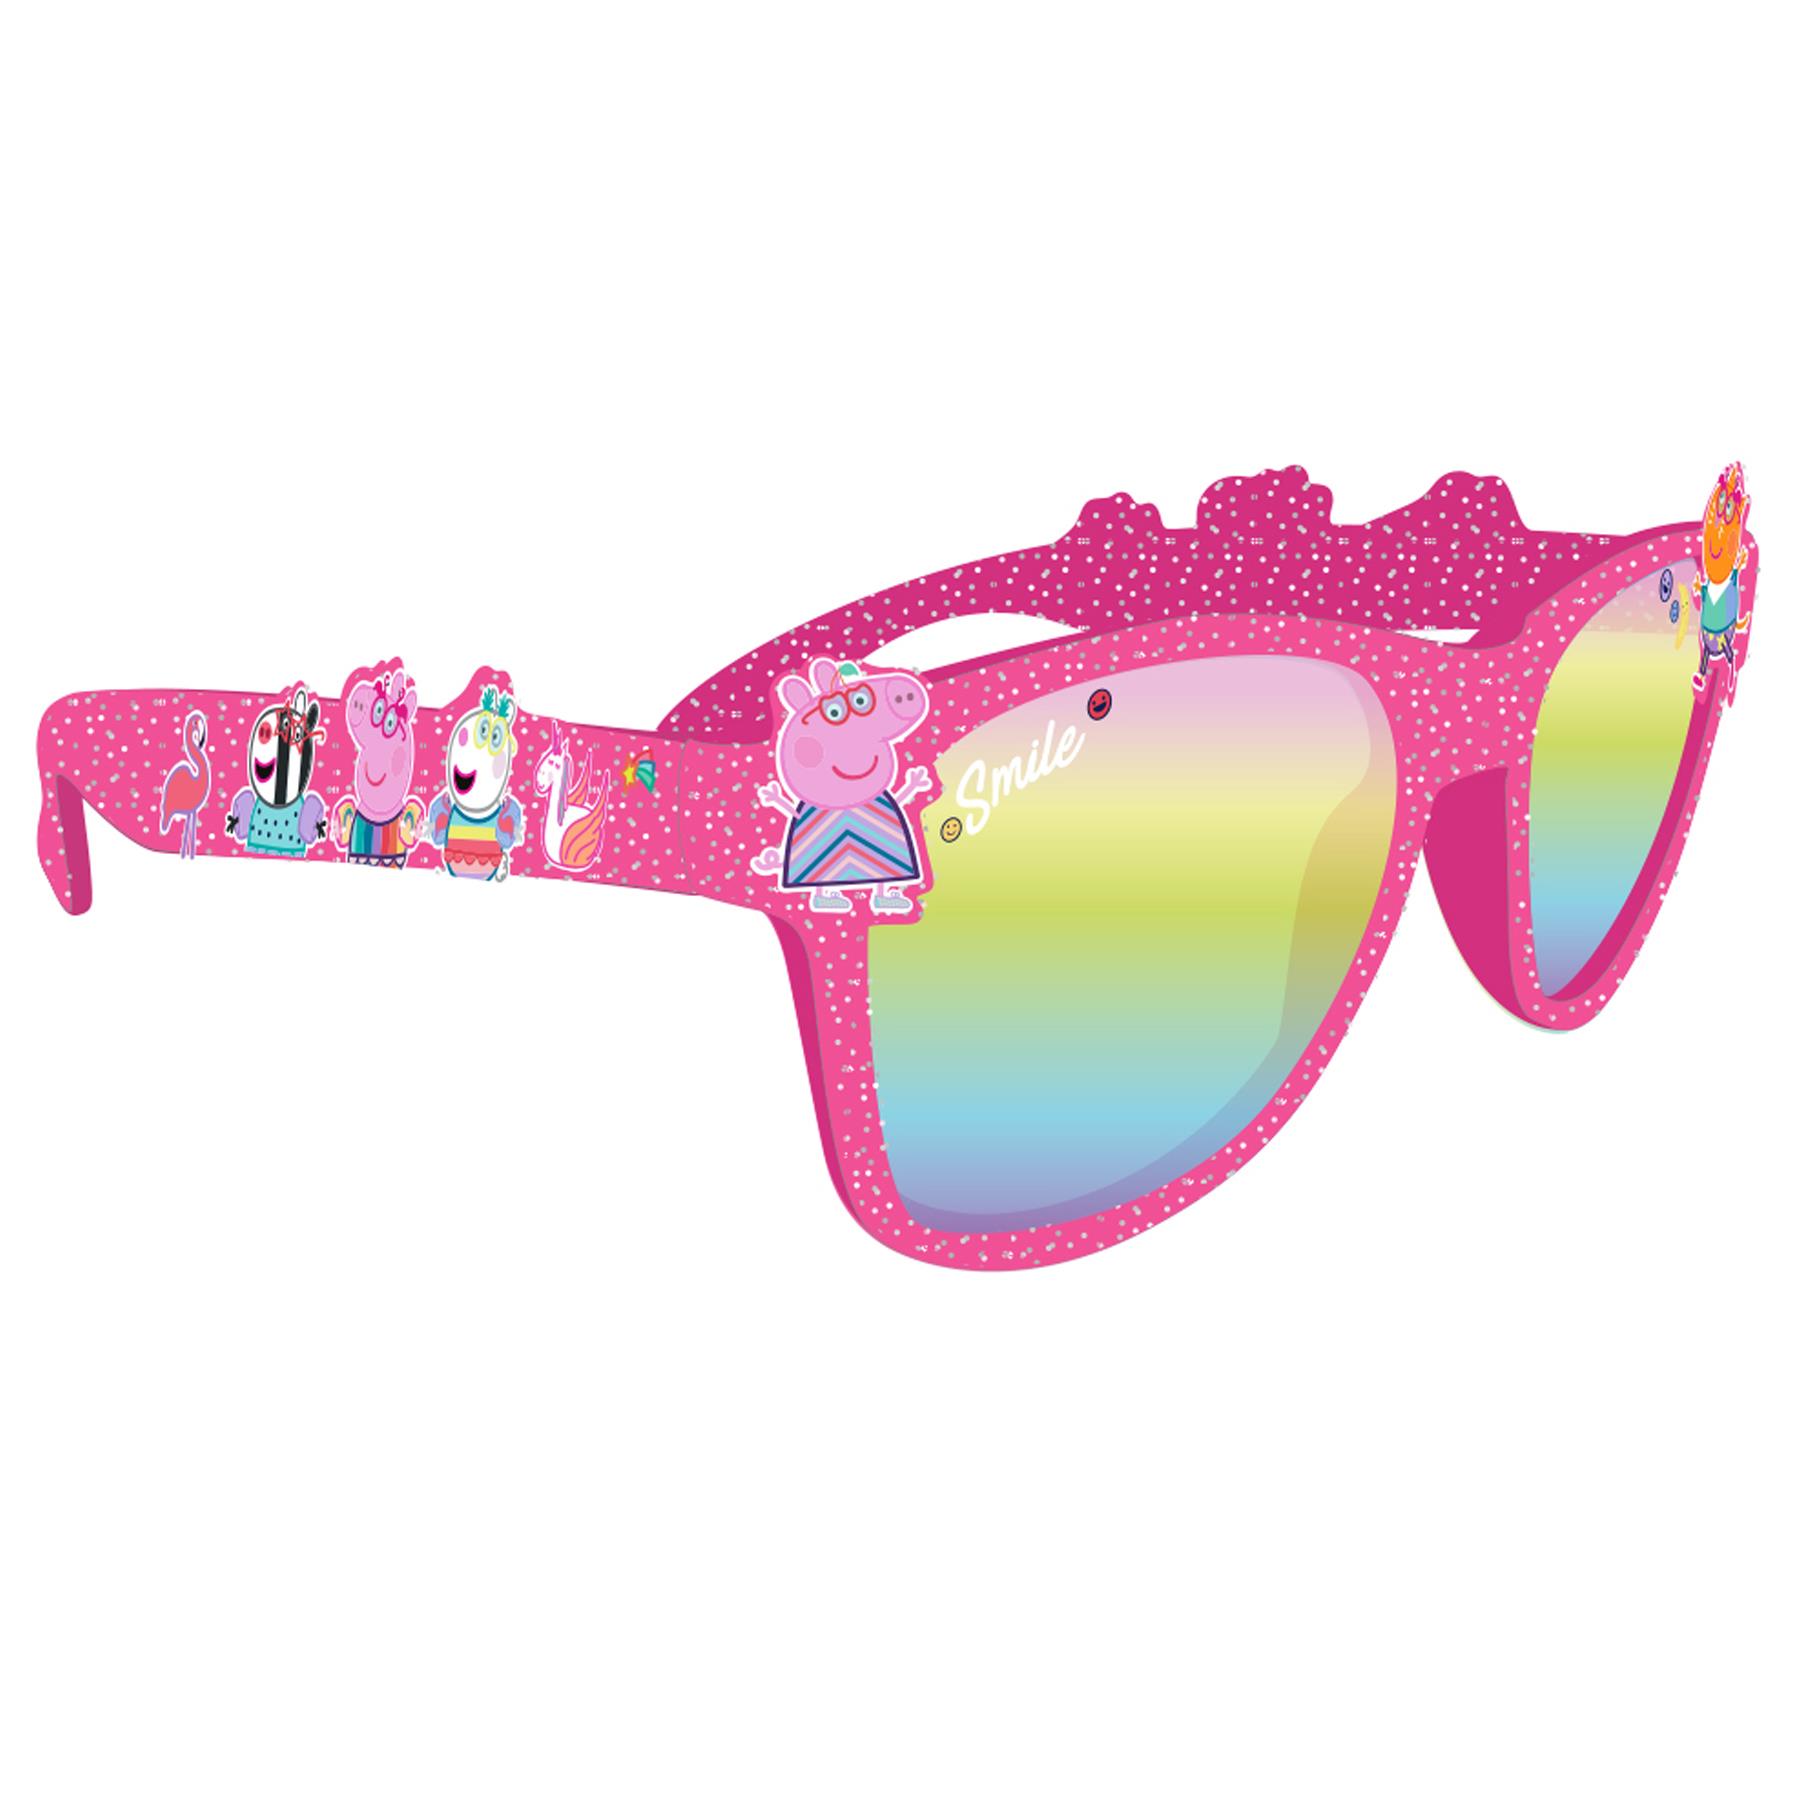 Peppa Pig Children's Character Sunglasses UV protection for Holiday - PEPPA13